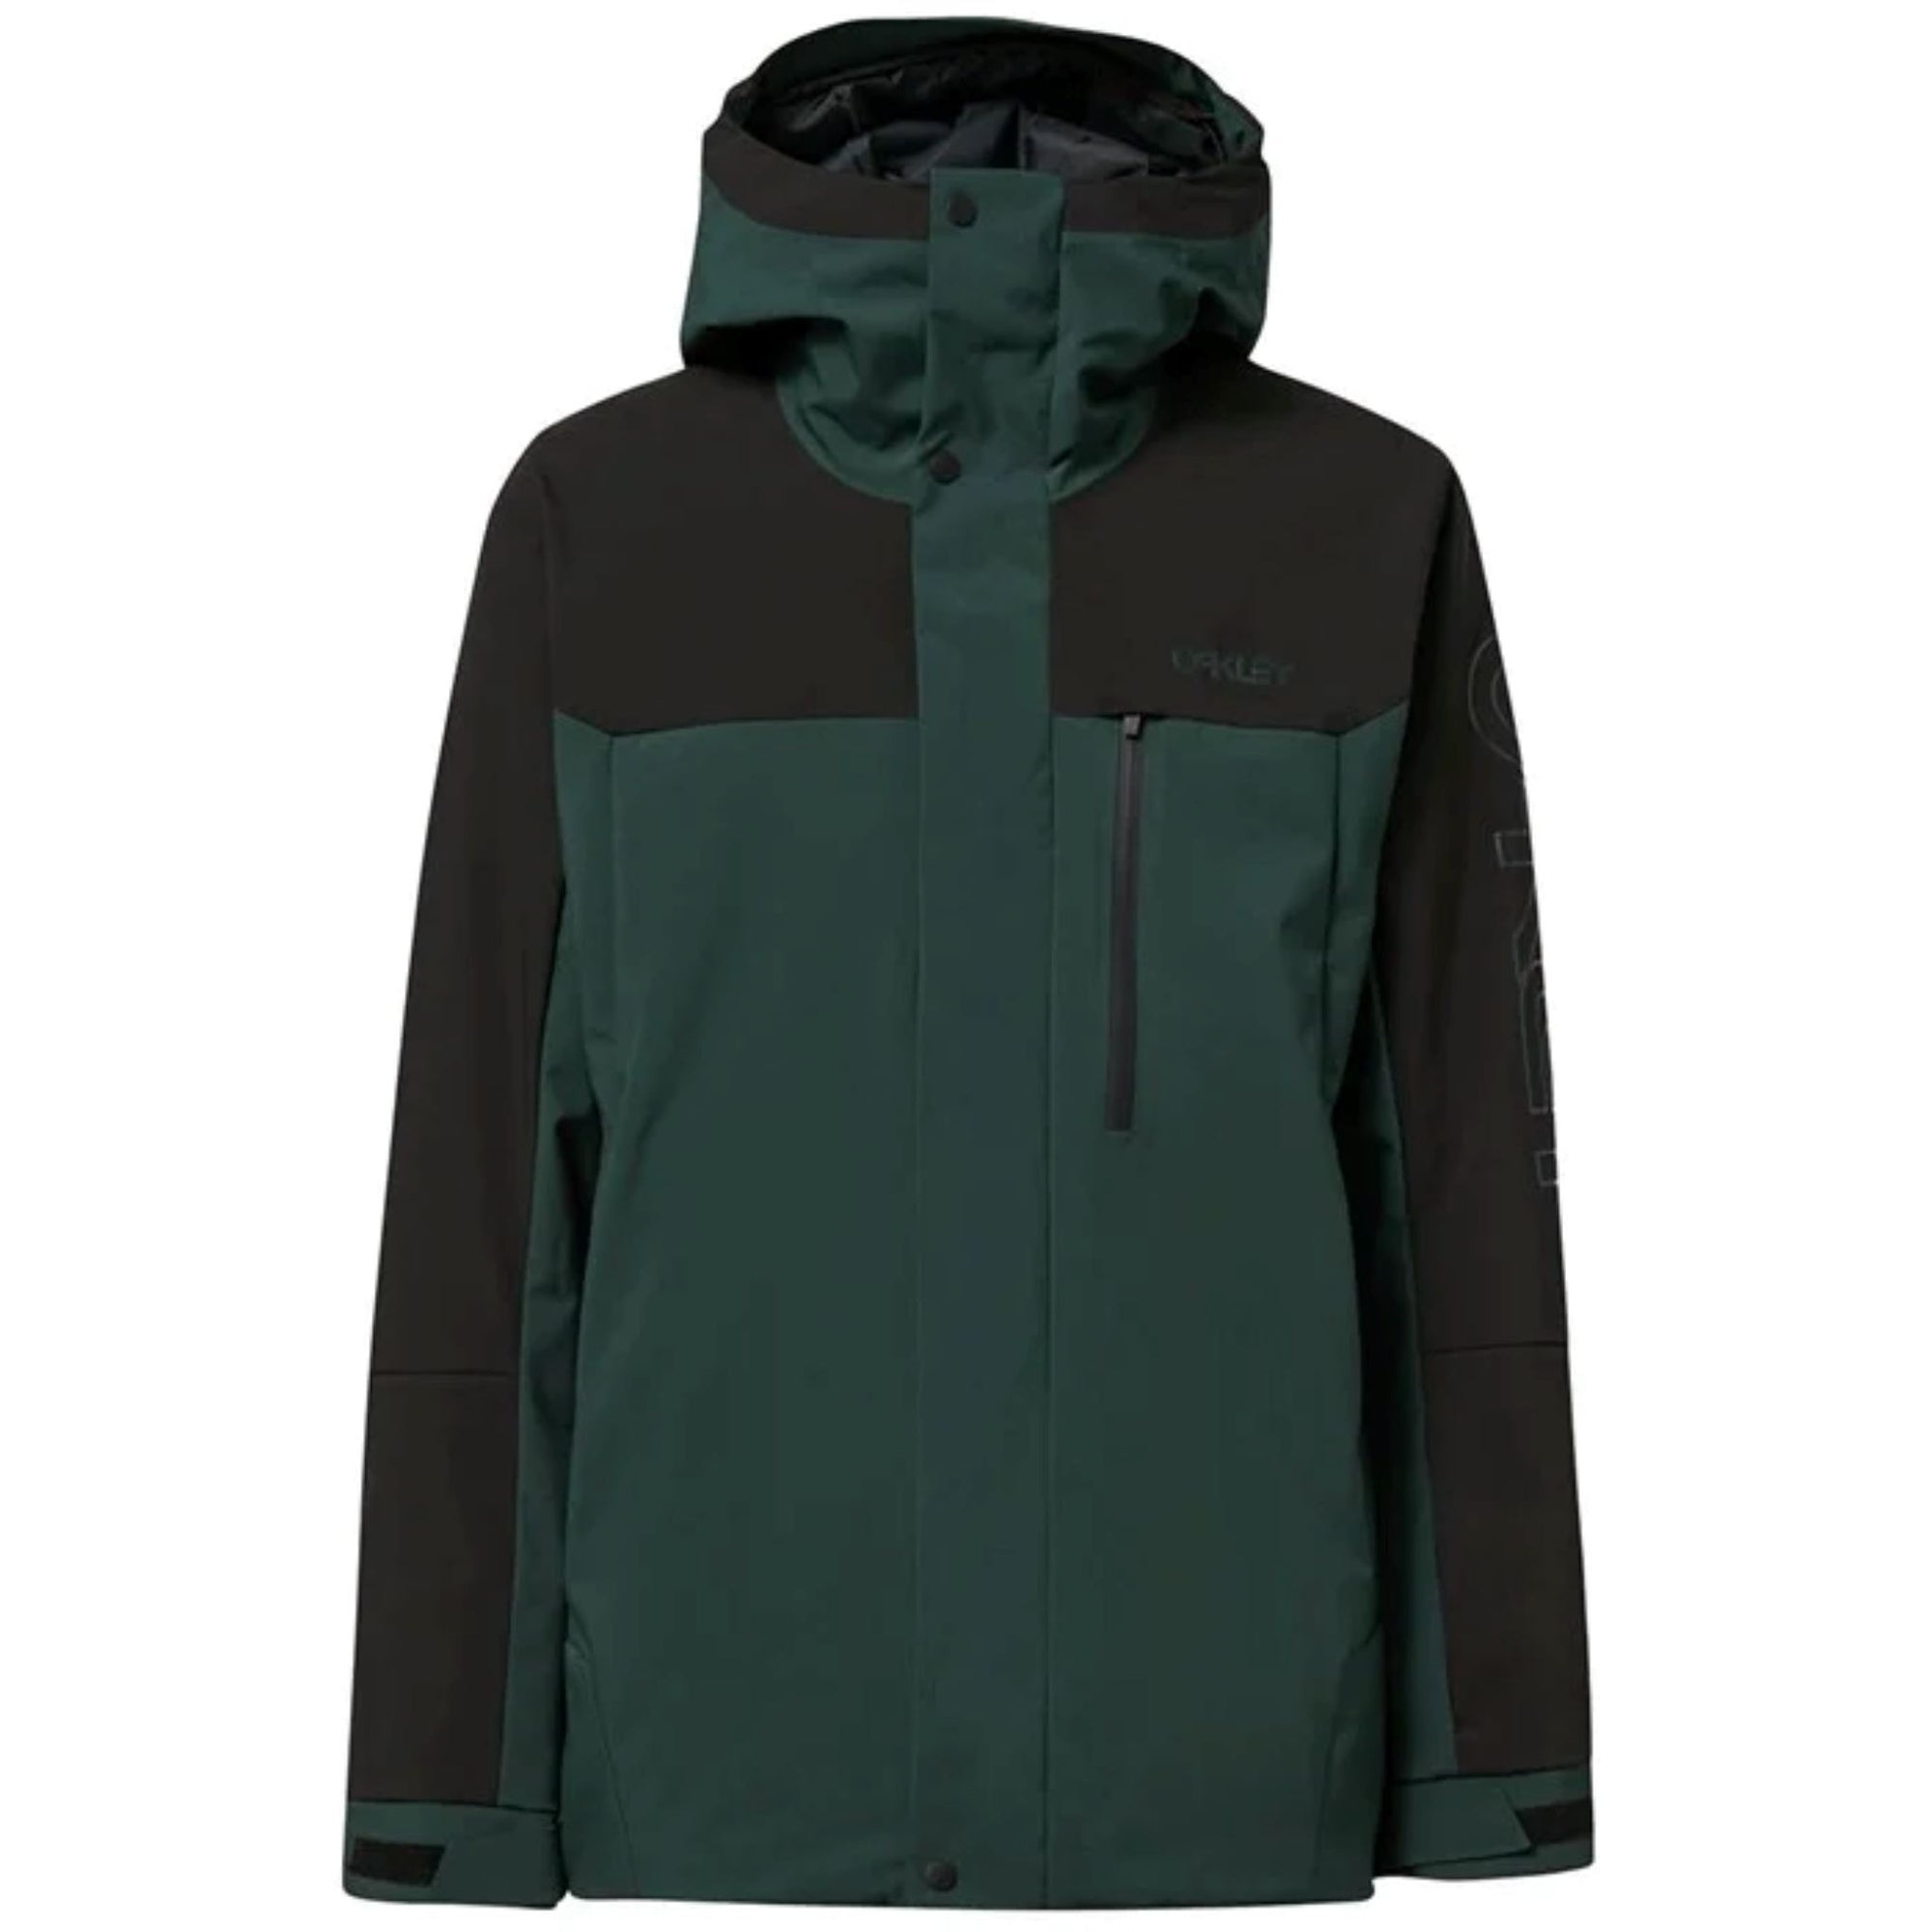 Mens Oakley Thermonuclear Protection TBT Insulated Jacket - Hunter Green/Blackout Jackets Oakley S INTL / S AU 